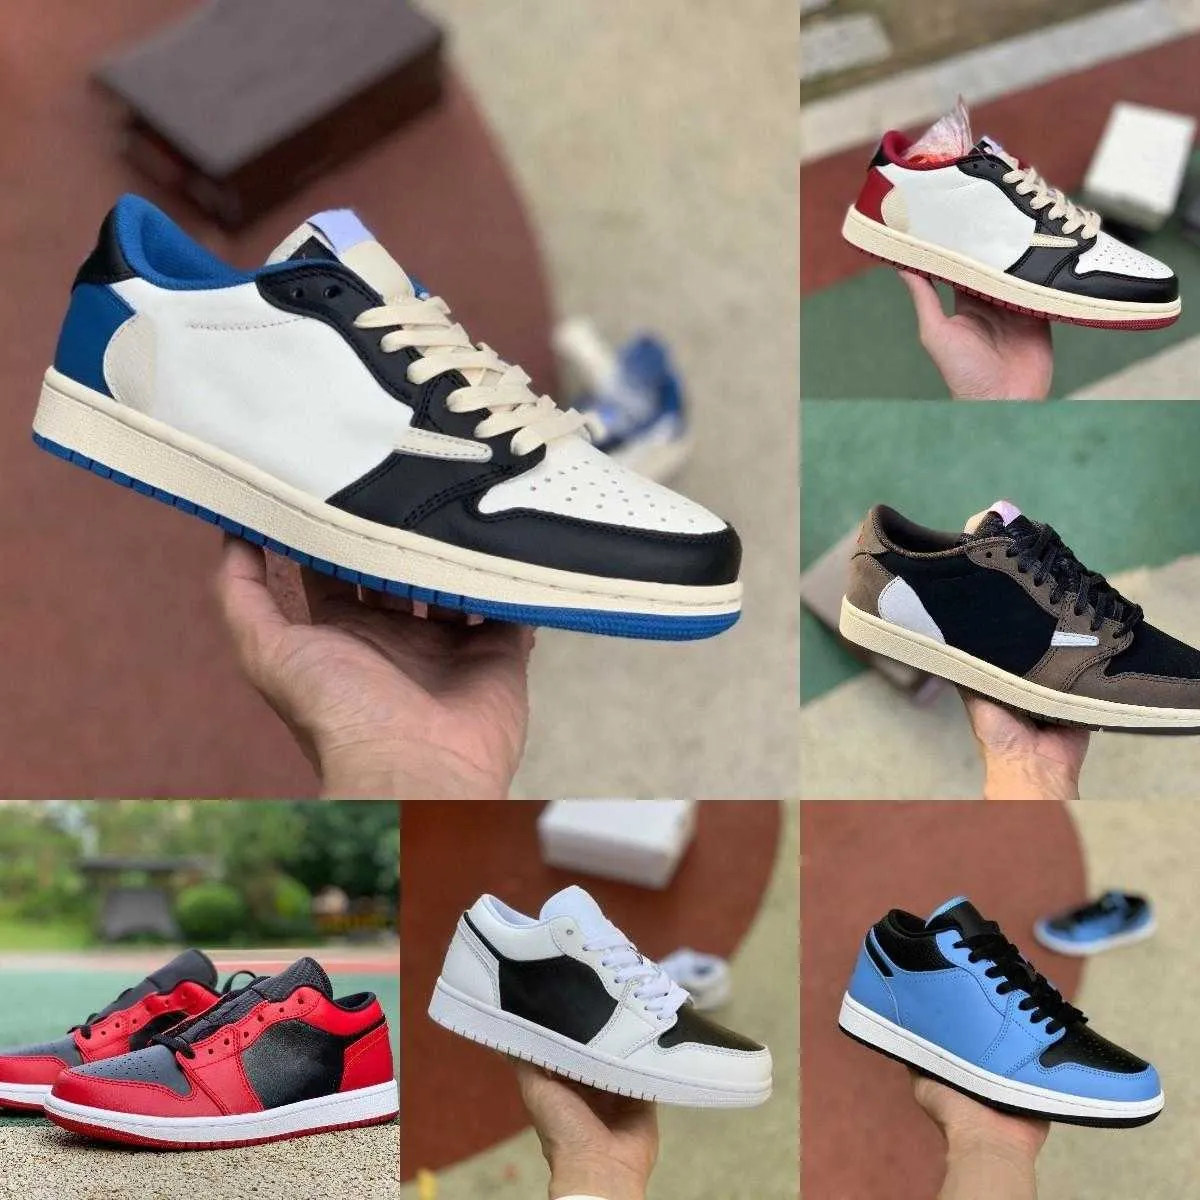 2022 Jumpman X 1 1S Low Basketball Shoes Sandals Starfish White Brown Gold Banned UNC Court Purple Gold Black Toe Panda Noble Red Wolf Grey Designer Sports Sneakers